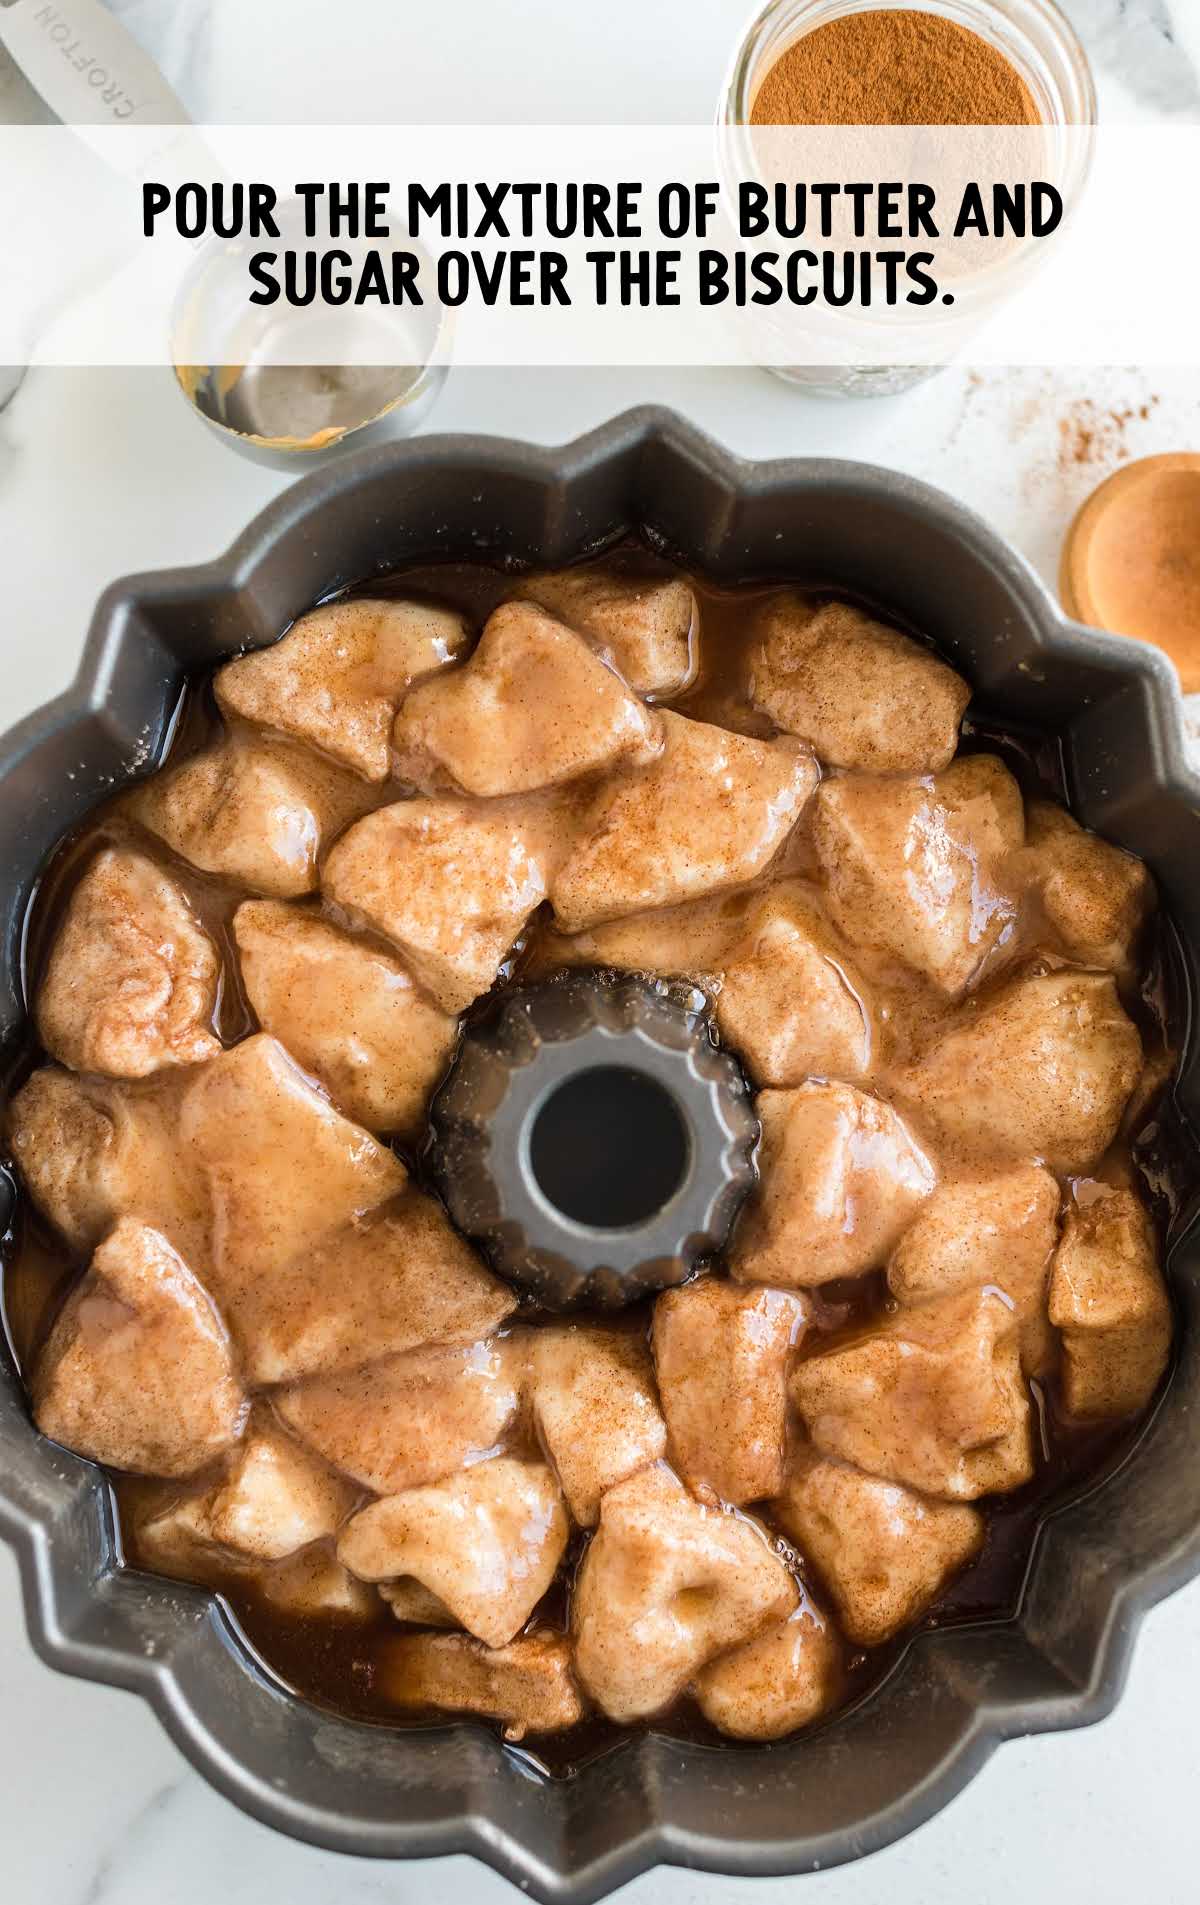 butter and sugar mixture poured on top of the biscuits in the bundt pan